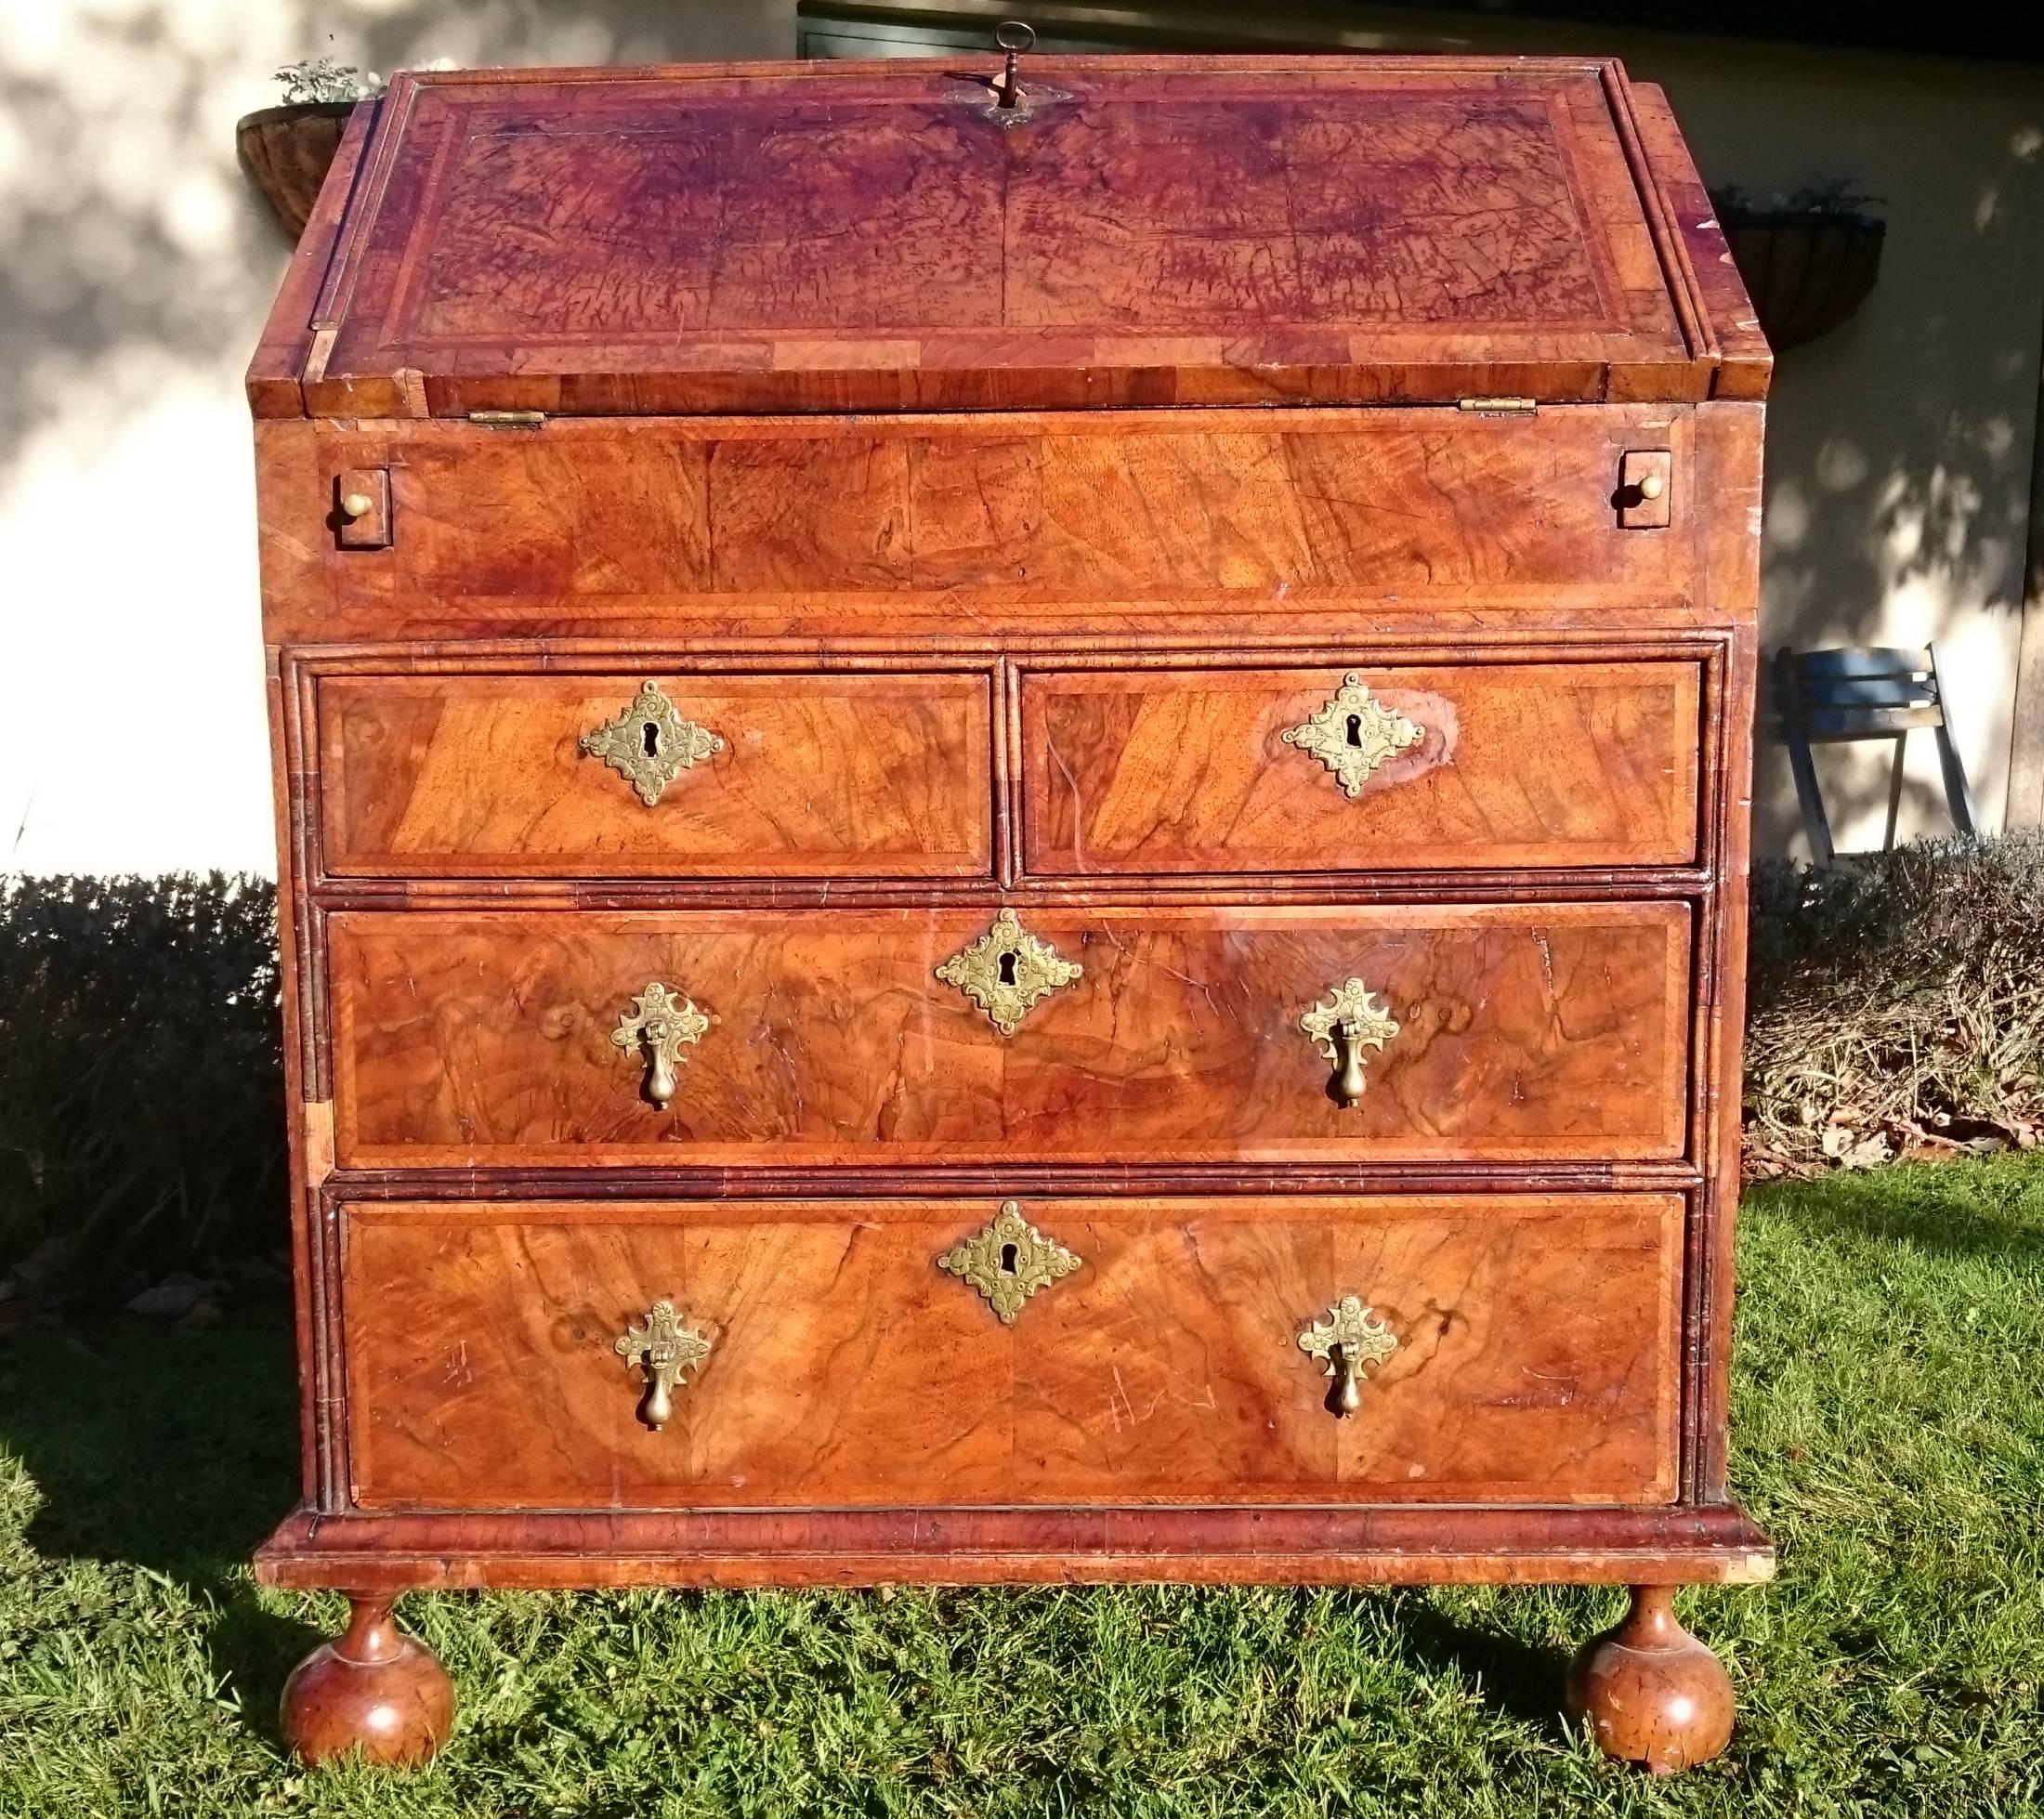 Early 18th century George I period small walnut antique bureau of unusually small-scale standing on four turned bun feet. This is a charming bureau which really shows off the pre-mahogany era of furniture making very well. It has feather banding